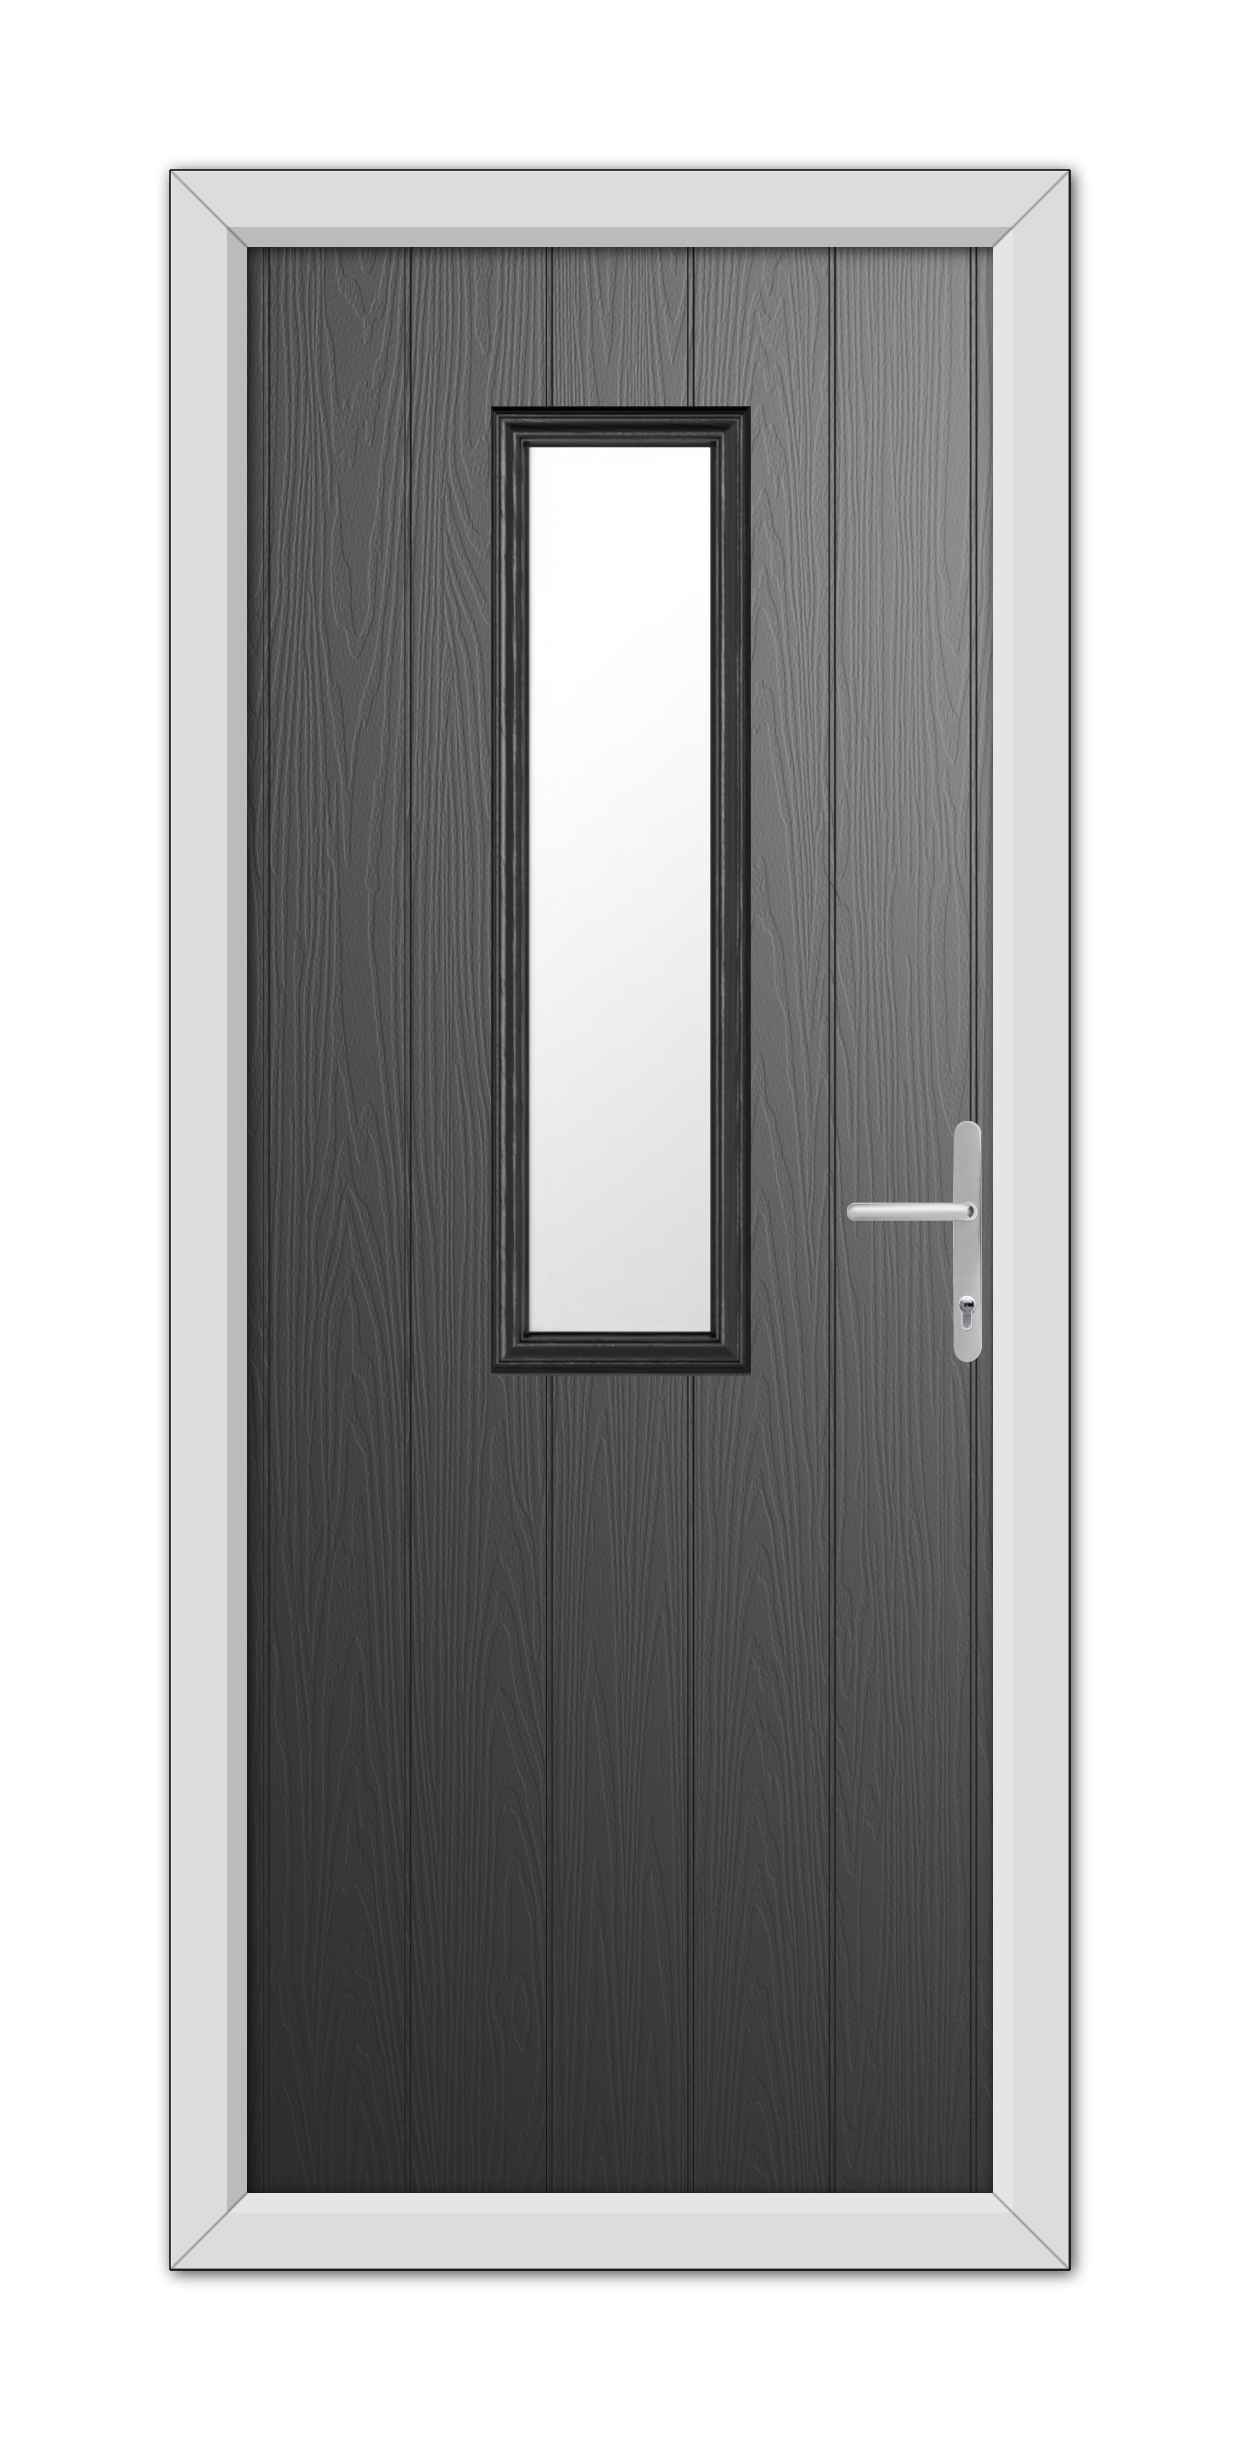 A Black Mowbray Composite Door 48mm Timber Core with a vertical rectangular window and a silver handle, set within a white frame.